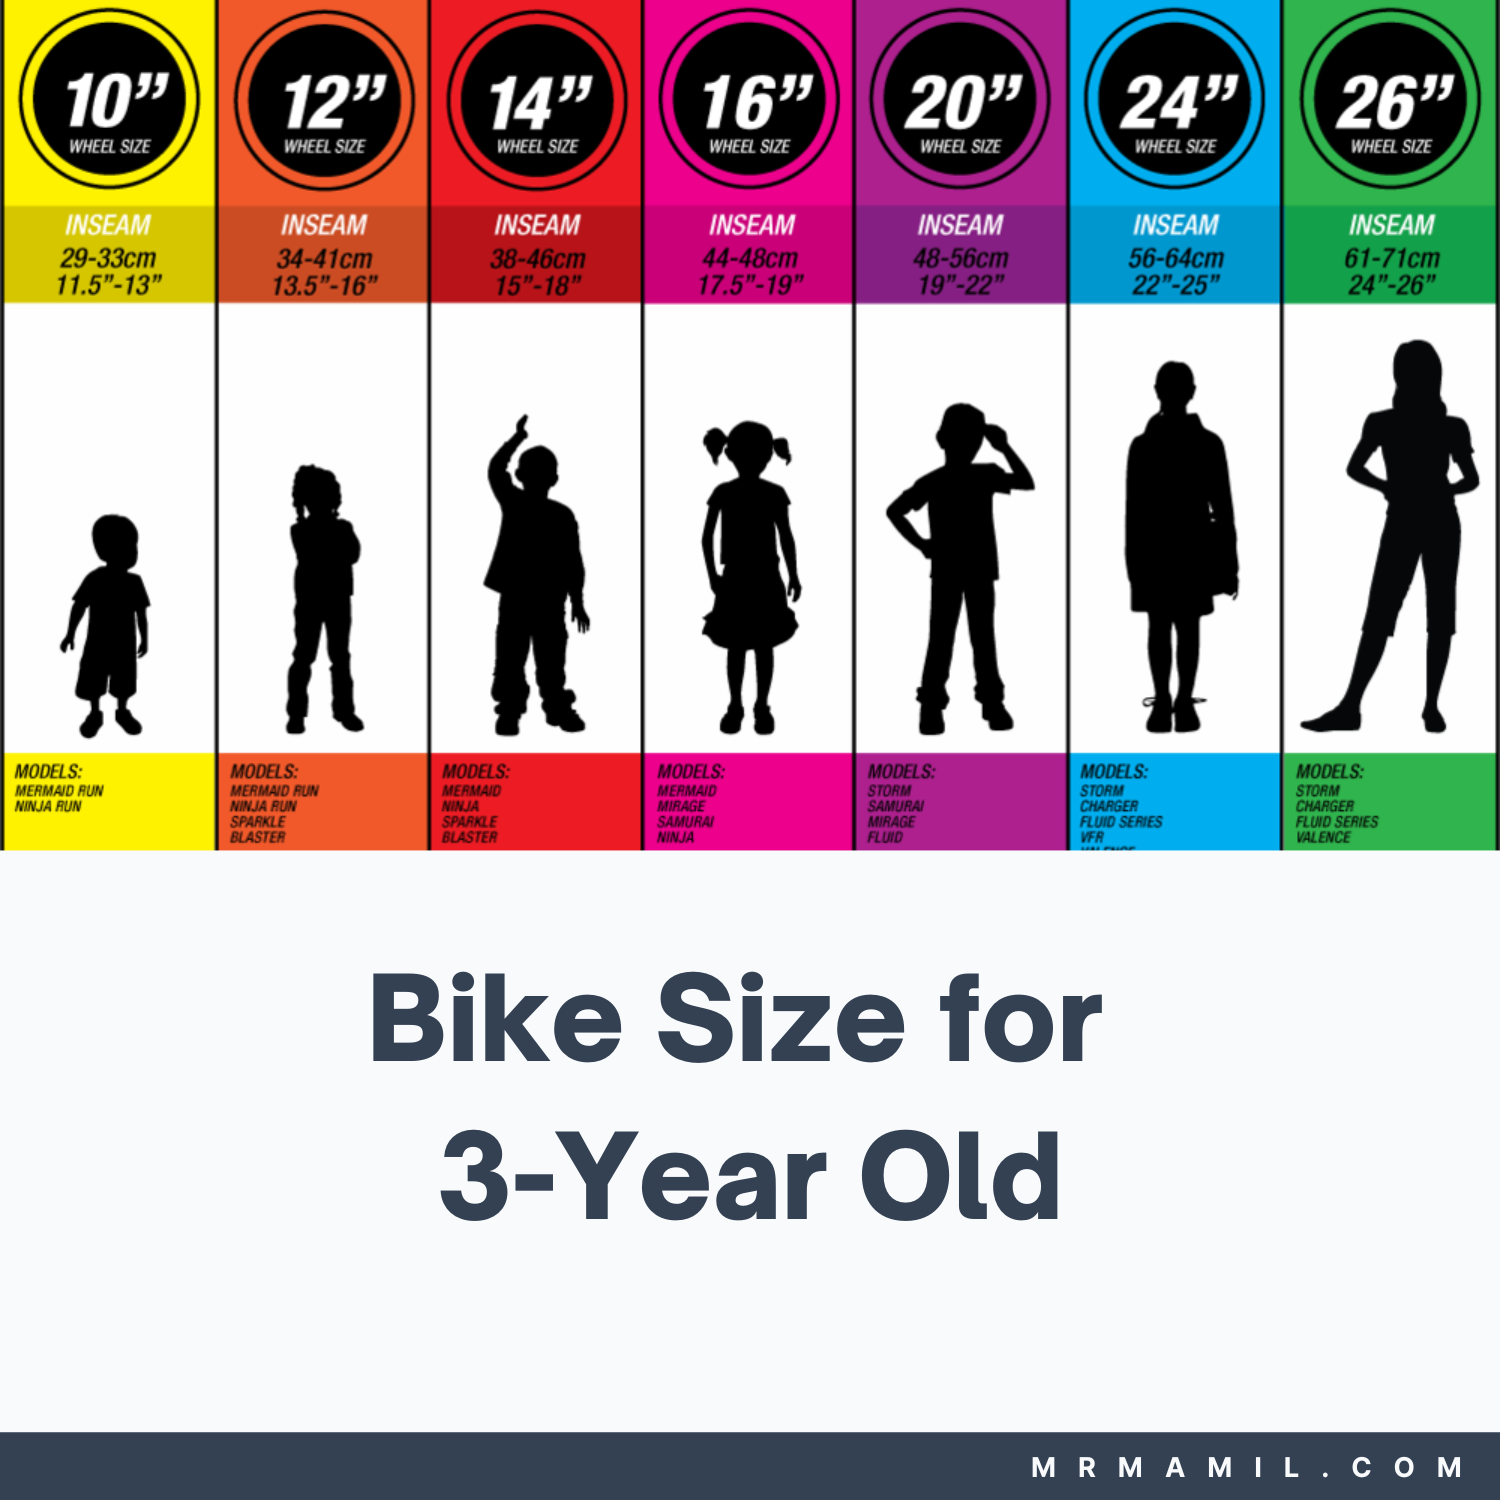 Bike Size for 3 Year Old